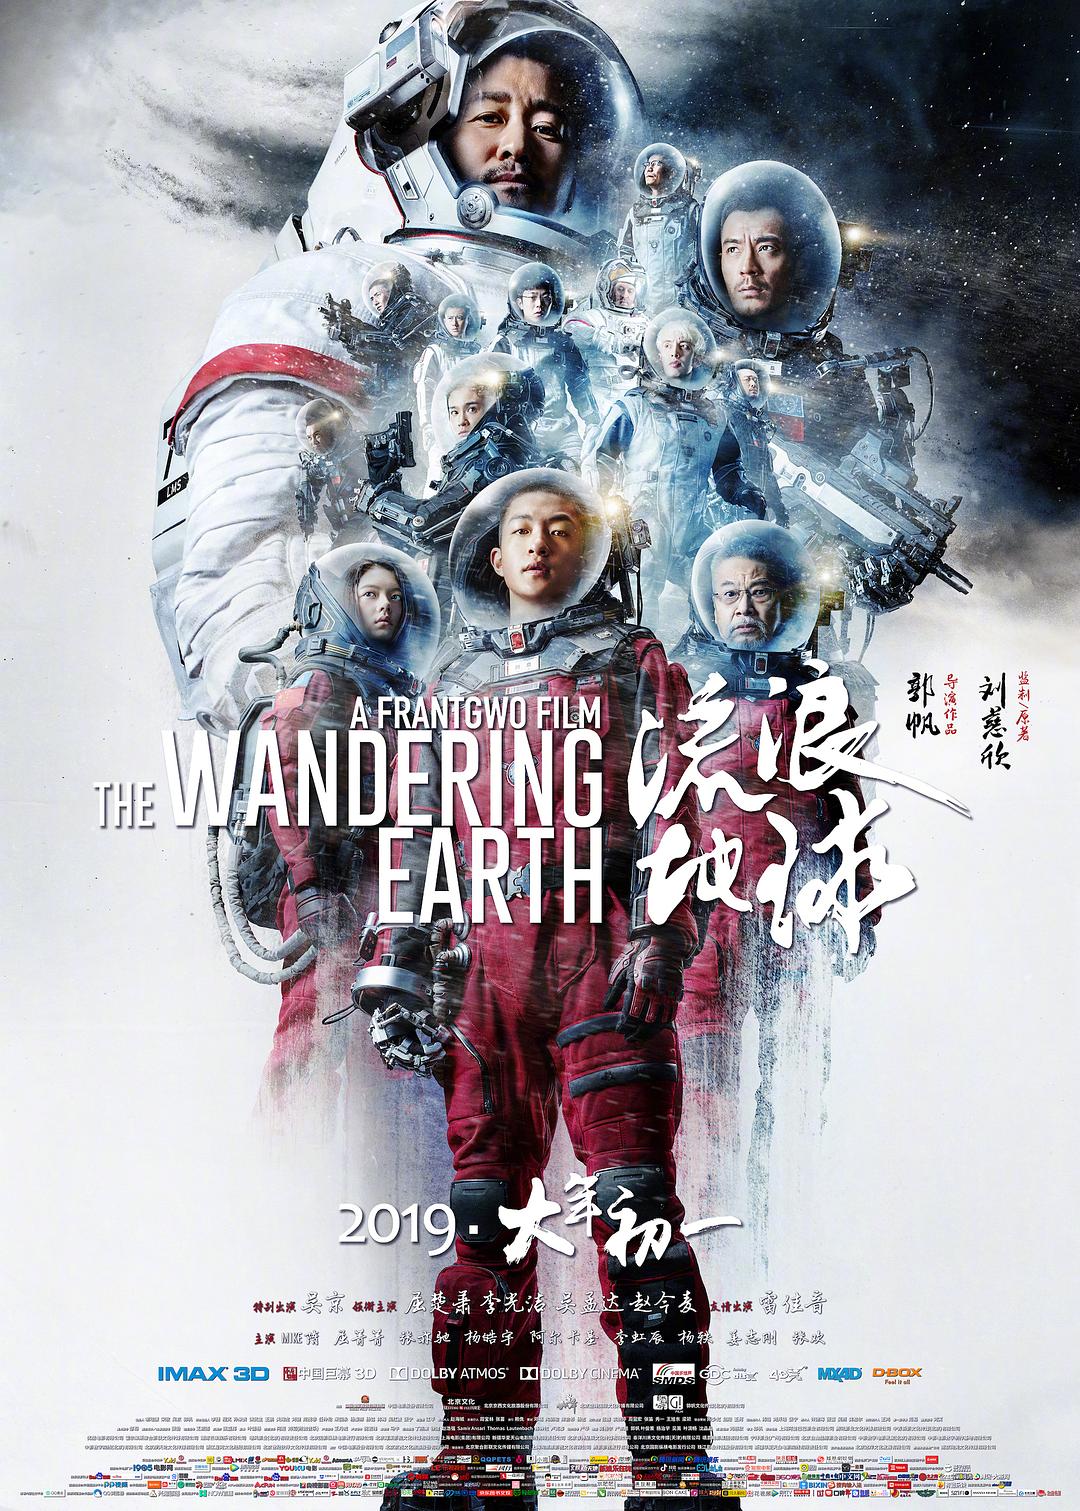 ˵ The.Wandering.Earth.2018.720p.BluRay.x264-REGRET 5.48GB-1.png